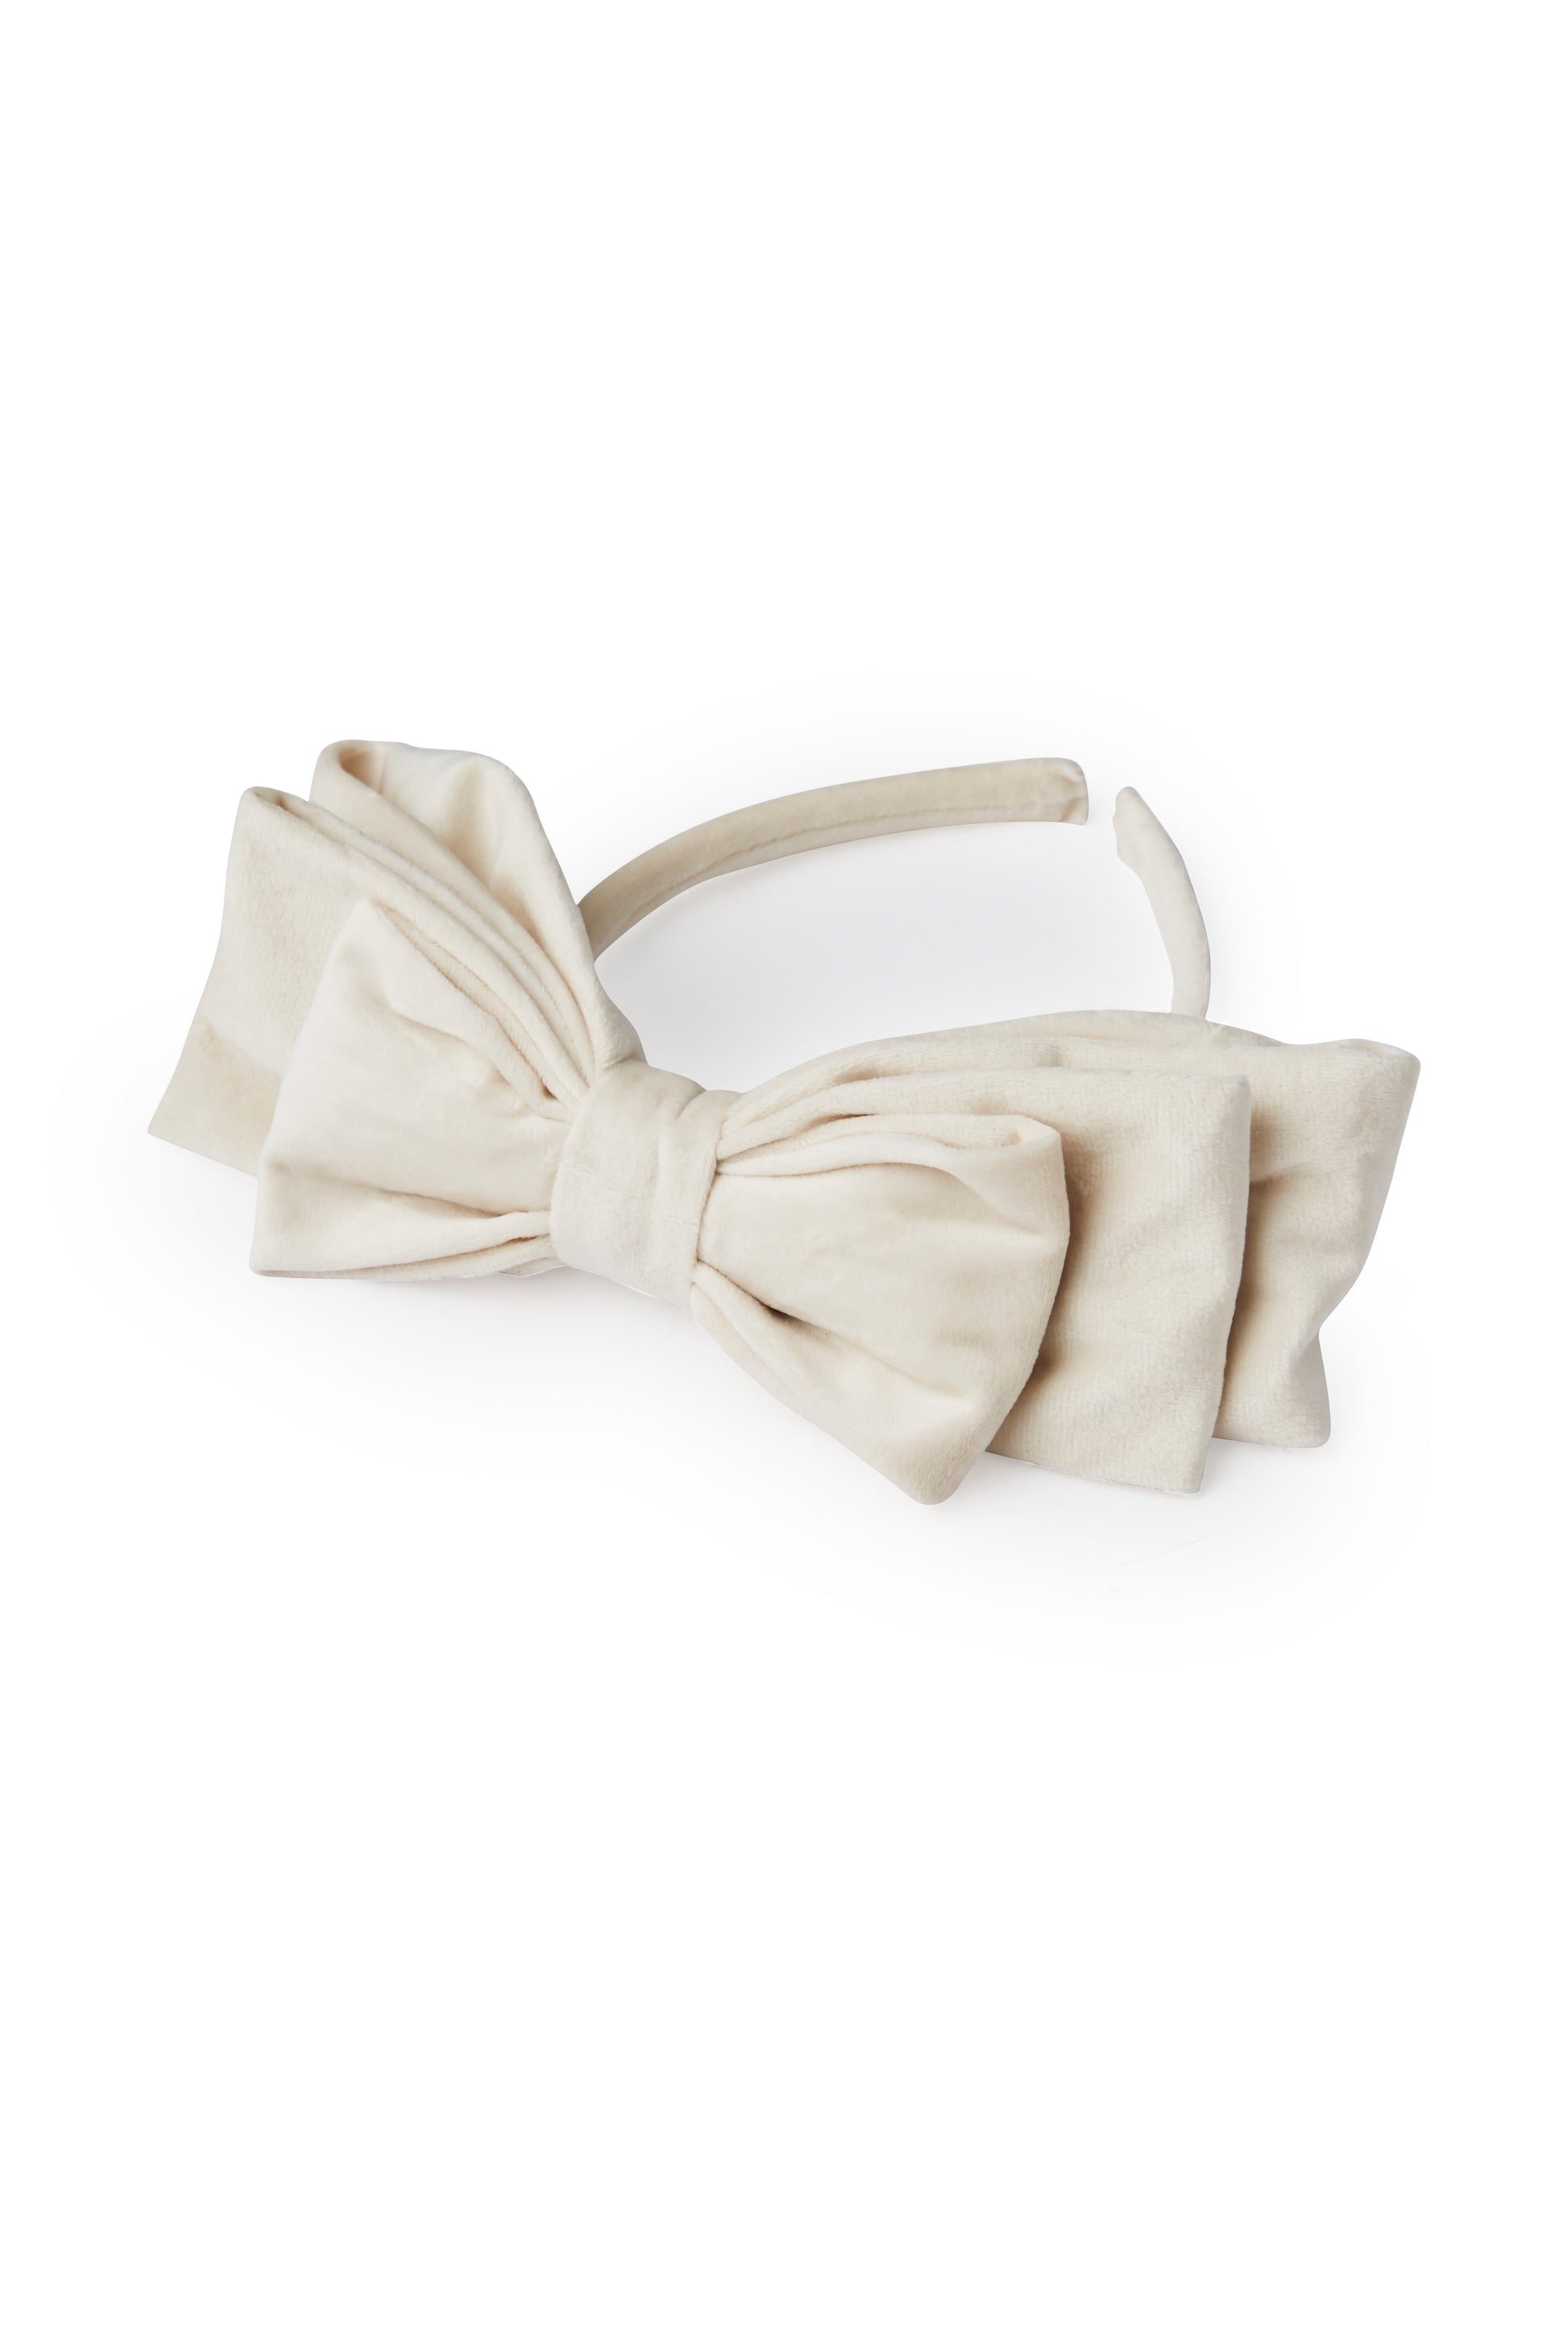 Headband with a big bow in white color